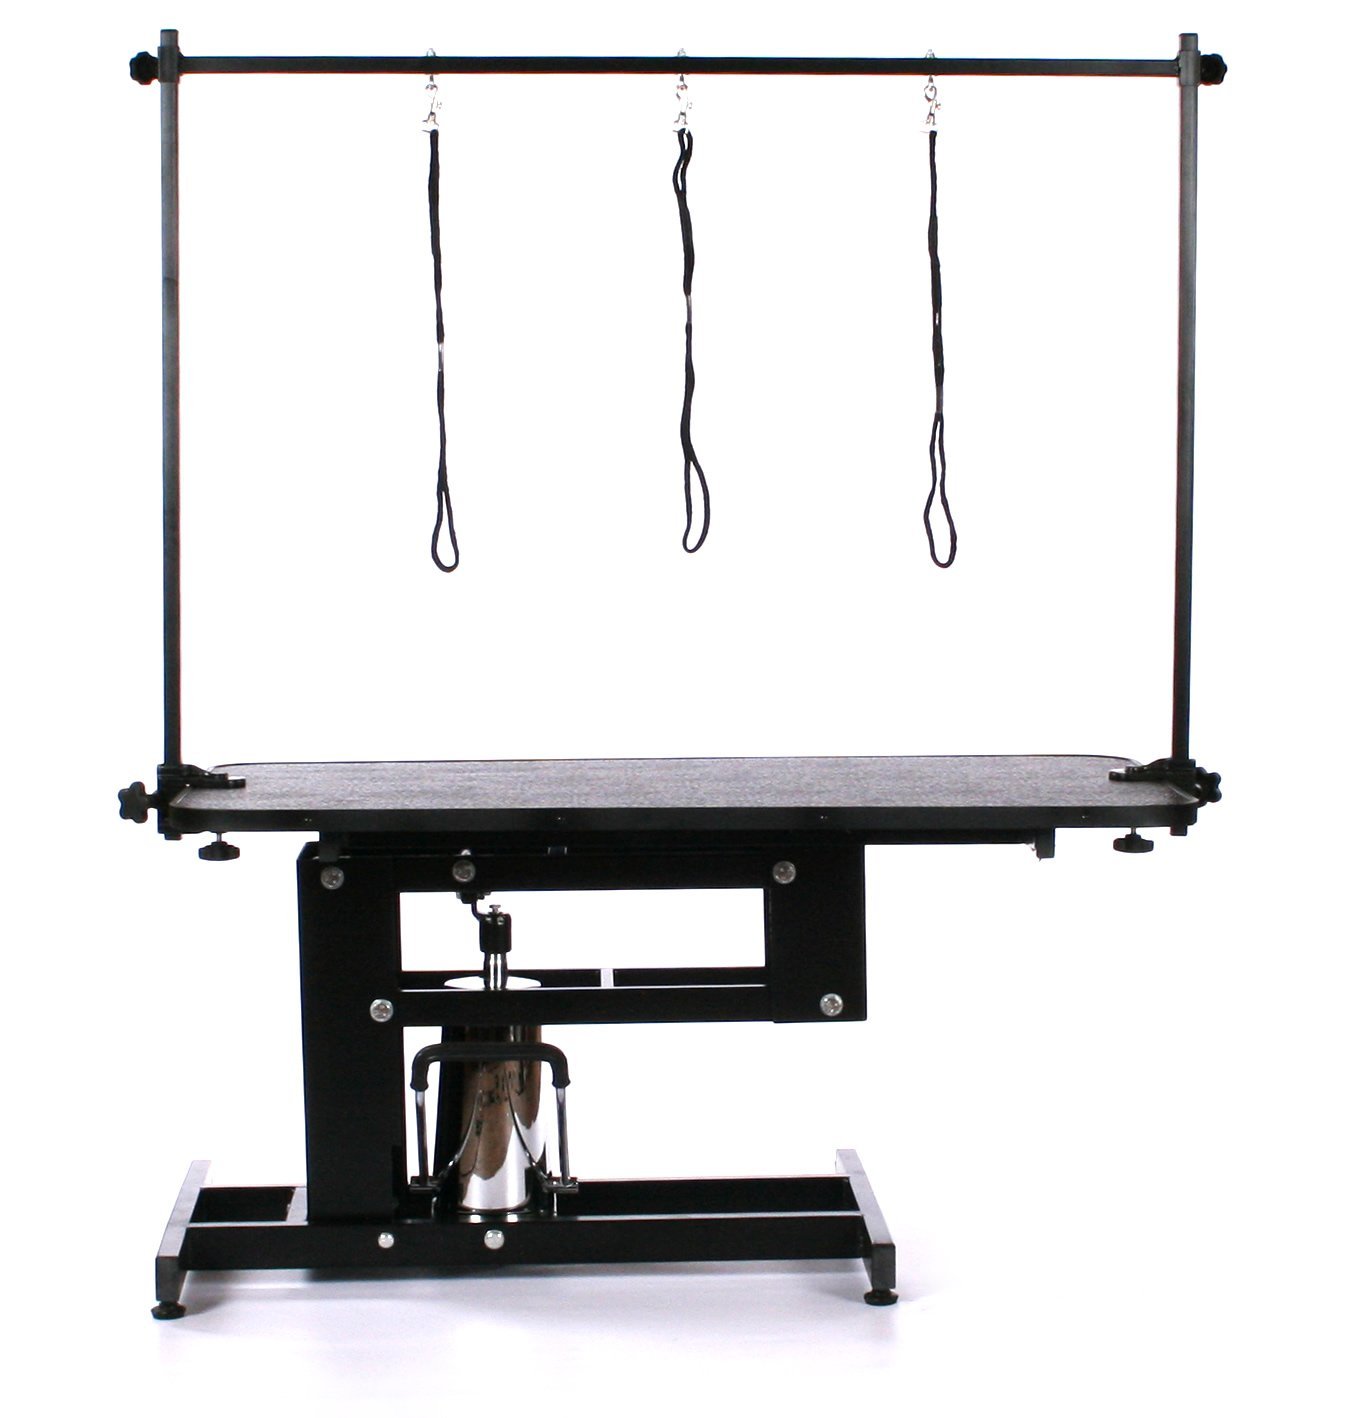 Professional Dog Pet Grooming Table Hydraulic Adjustable With Arm Noose New